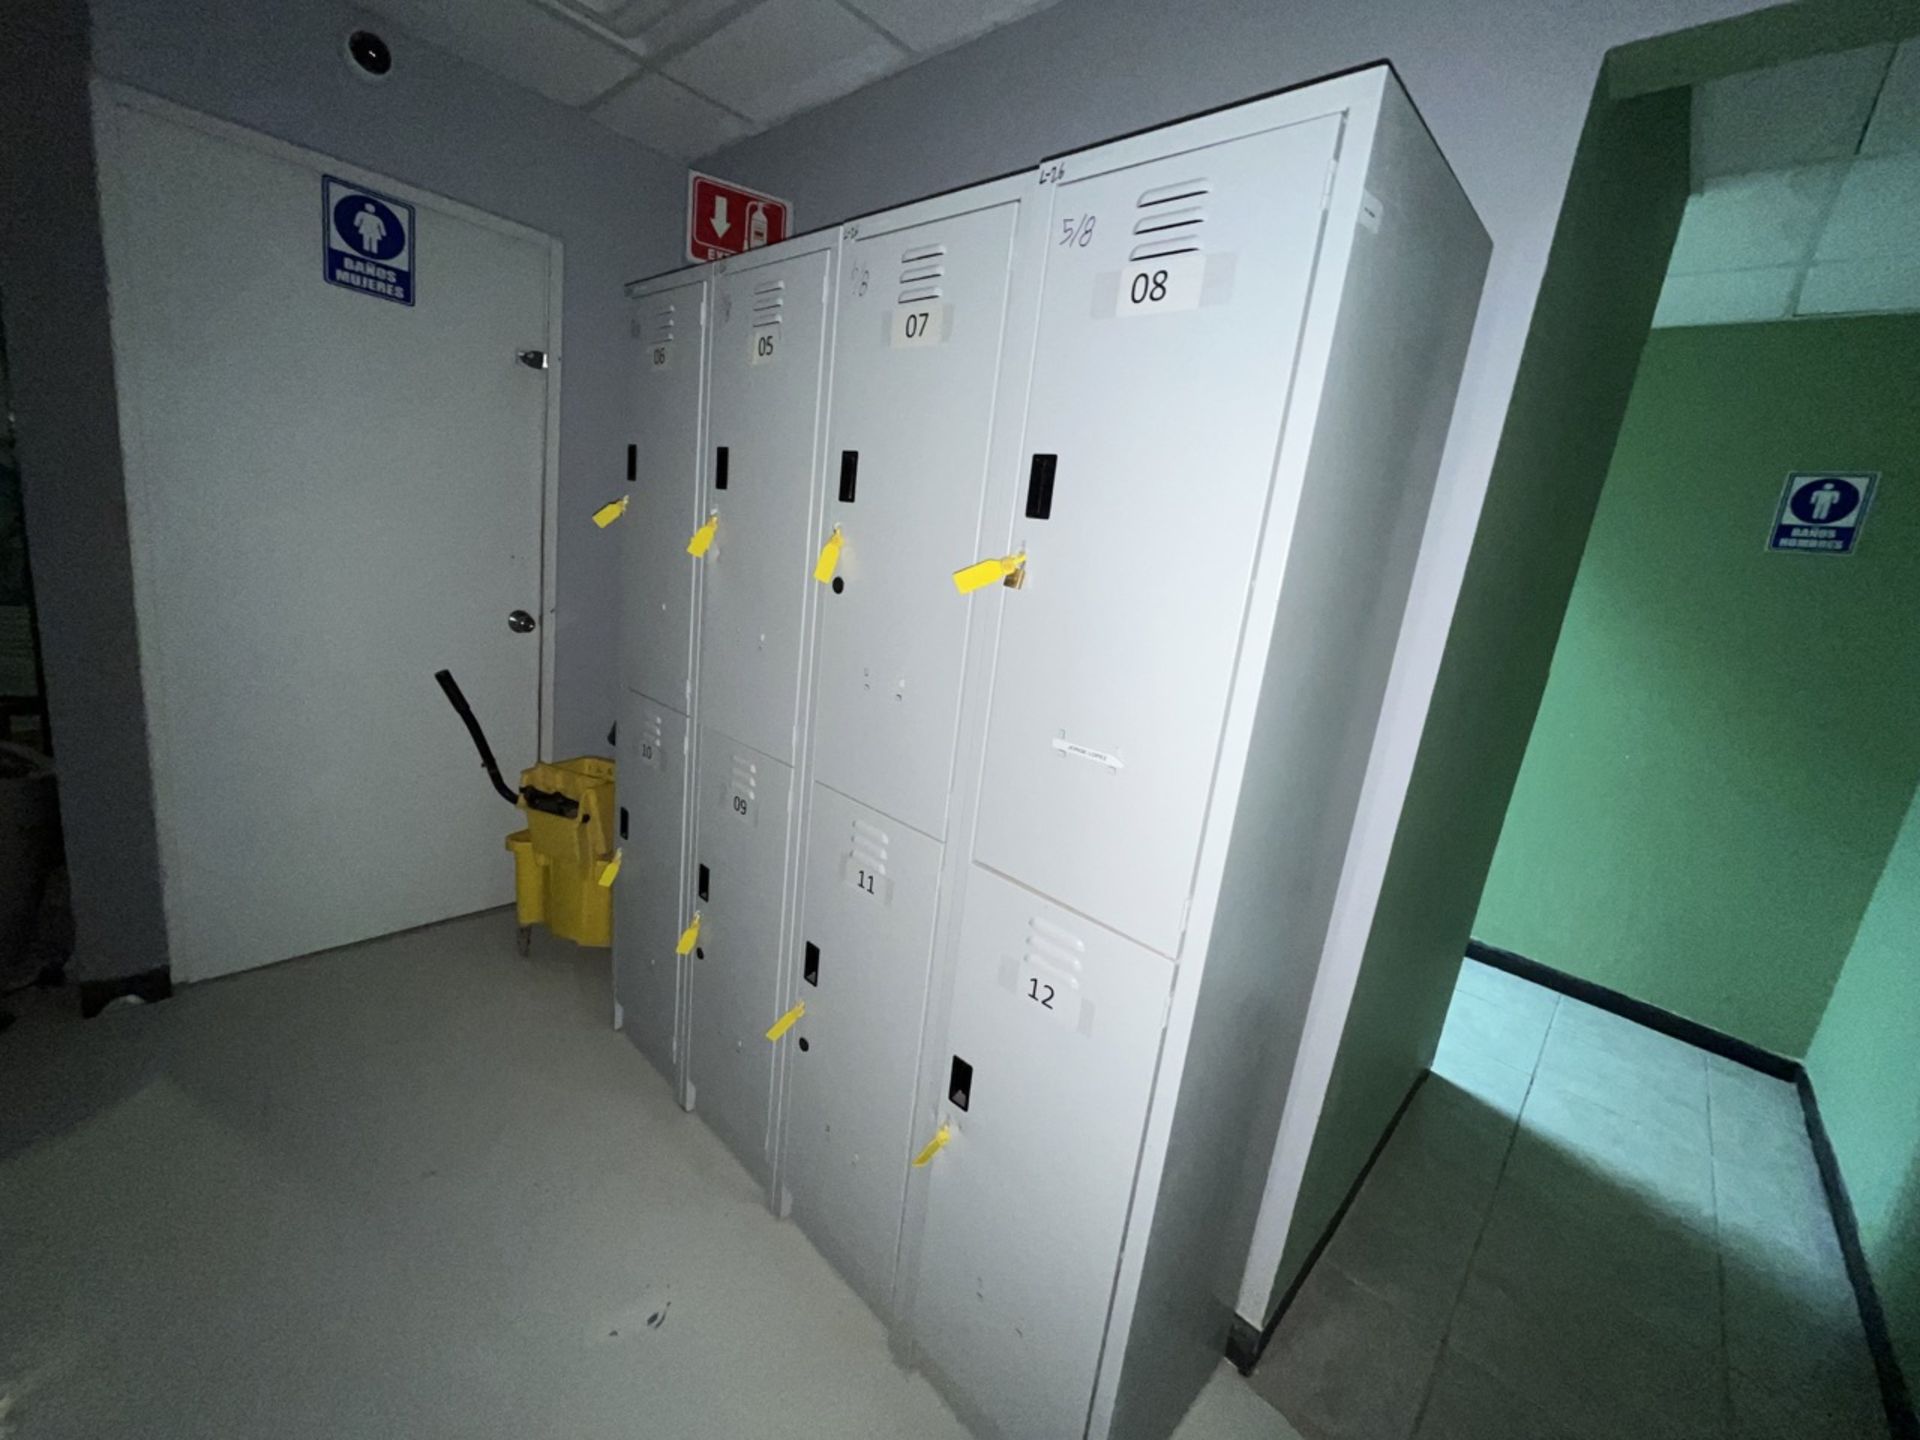 Lot of 8 storage lockers of 2 spaces each, measuring approximately 0.40 x 0.40 x 1.80 meters. / Lo - Image 3 of 6